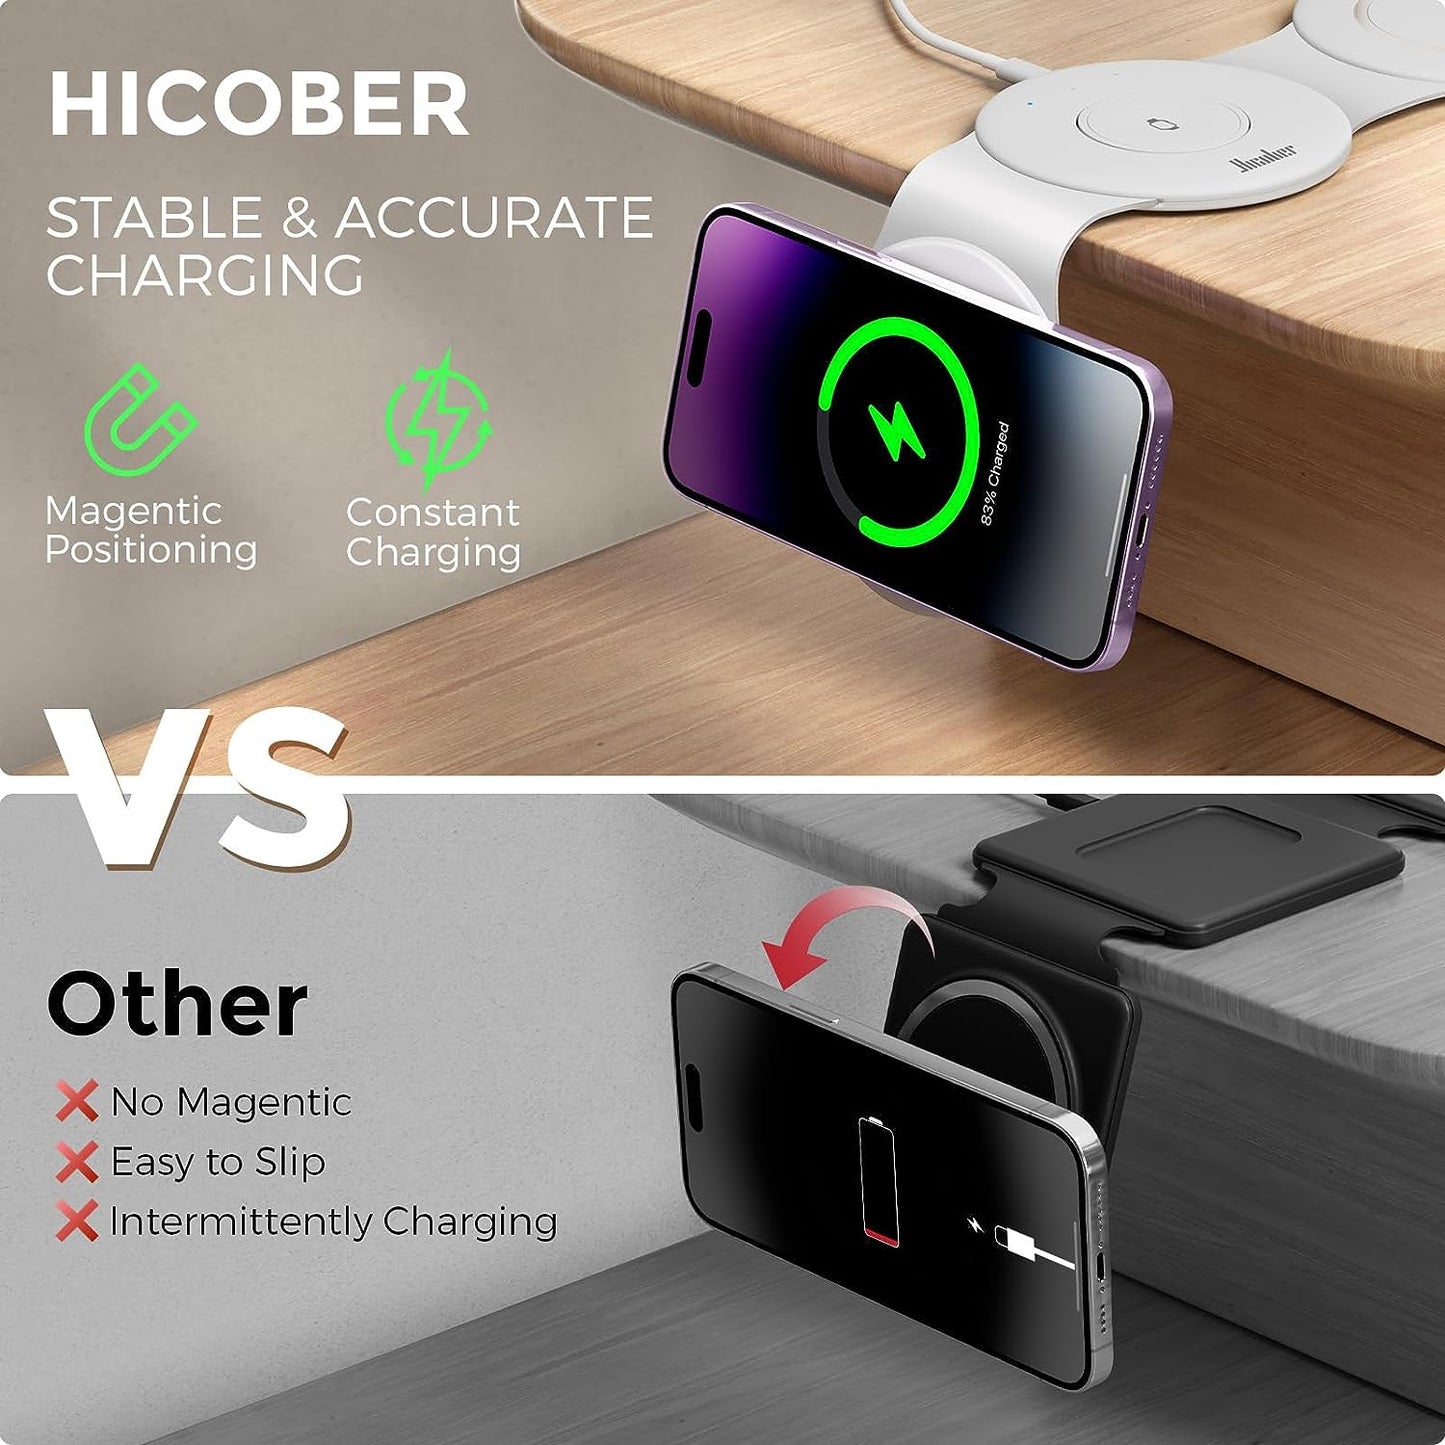 THE BEST 3 in 1 Charging Station for Apple Watch Charger, Hicober Magnetic Wireless Charger Foldable Travel Stand for iPhone 14/13 / 12 / Series iWatch 8 7 6 5 4 3 2 SE Airpods 3 2 Pro